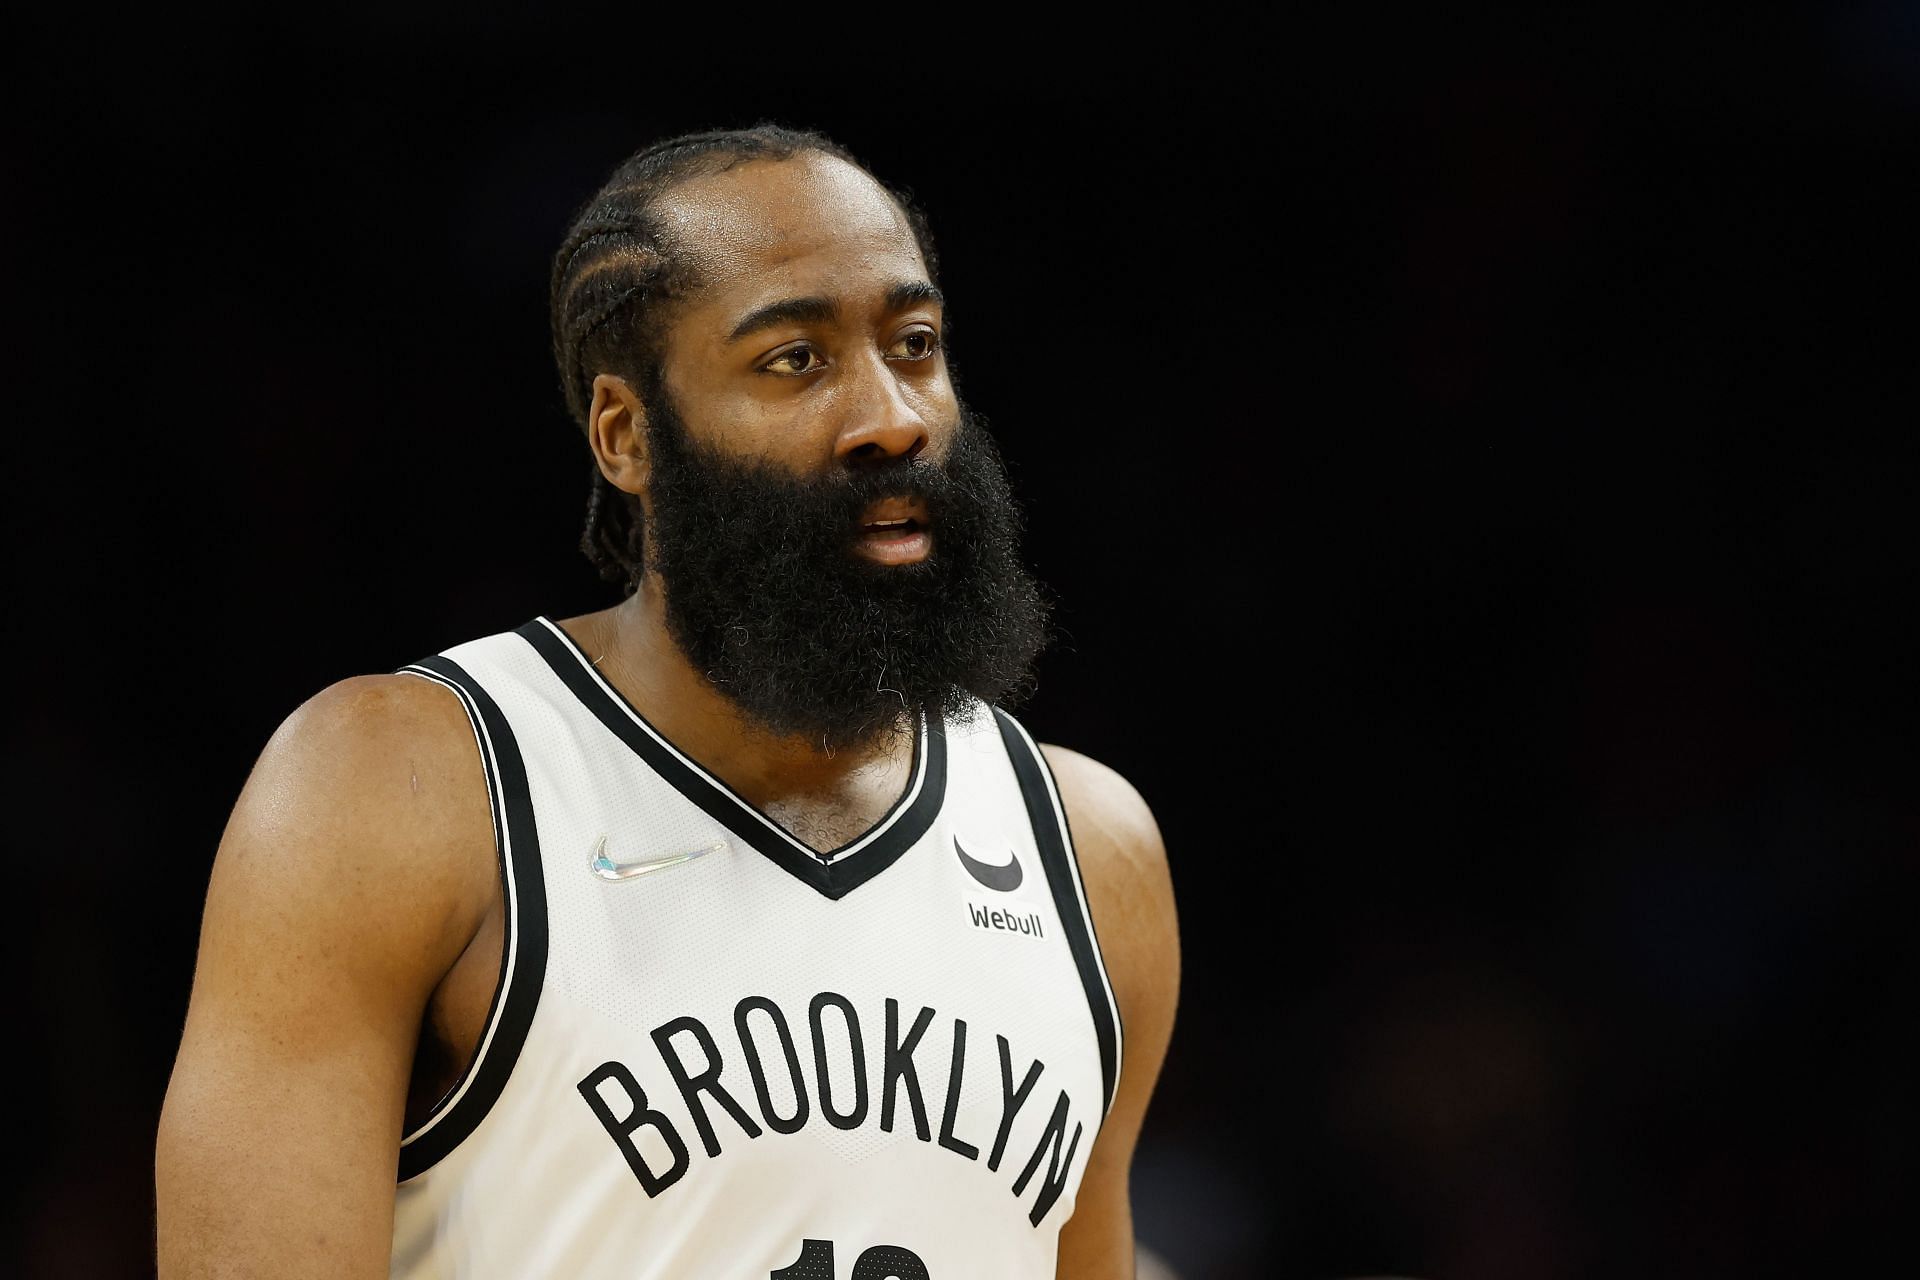 James Harden has been traded to the Philadelphia 76ers.